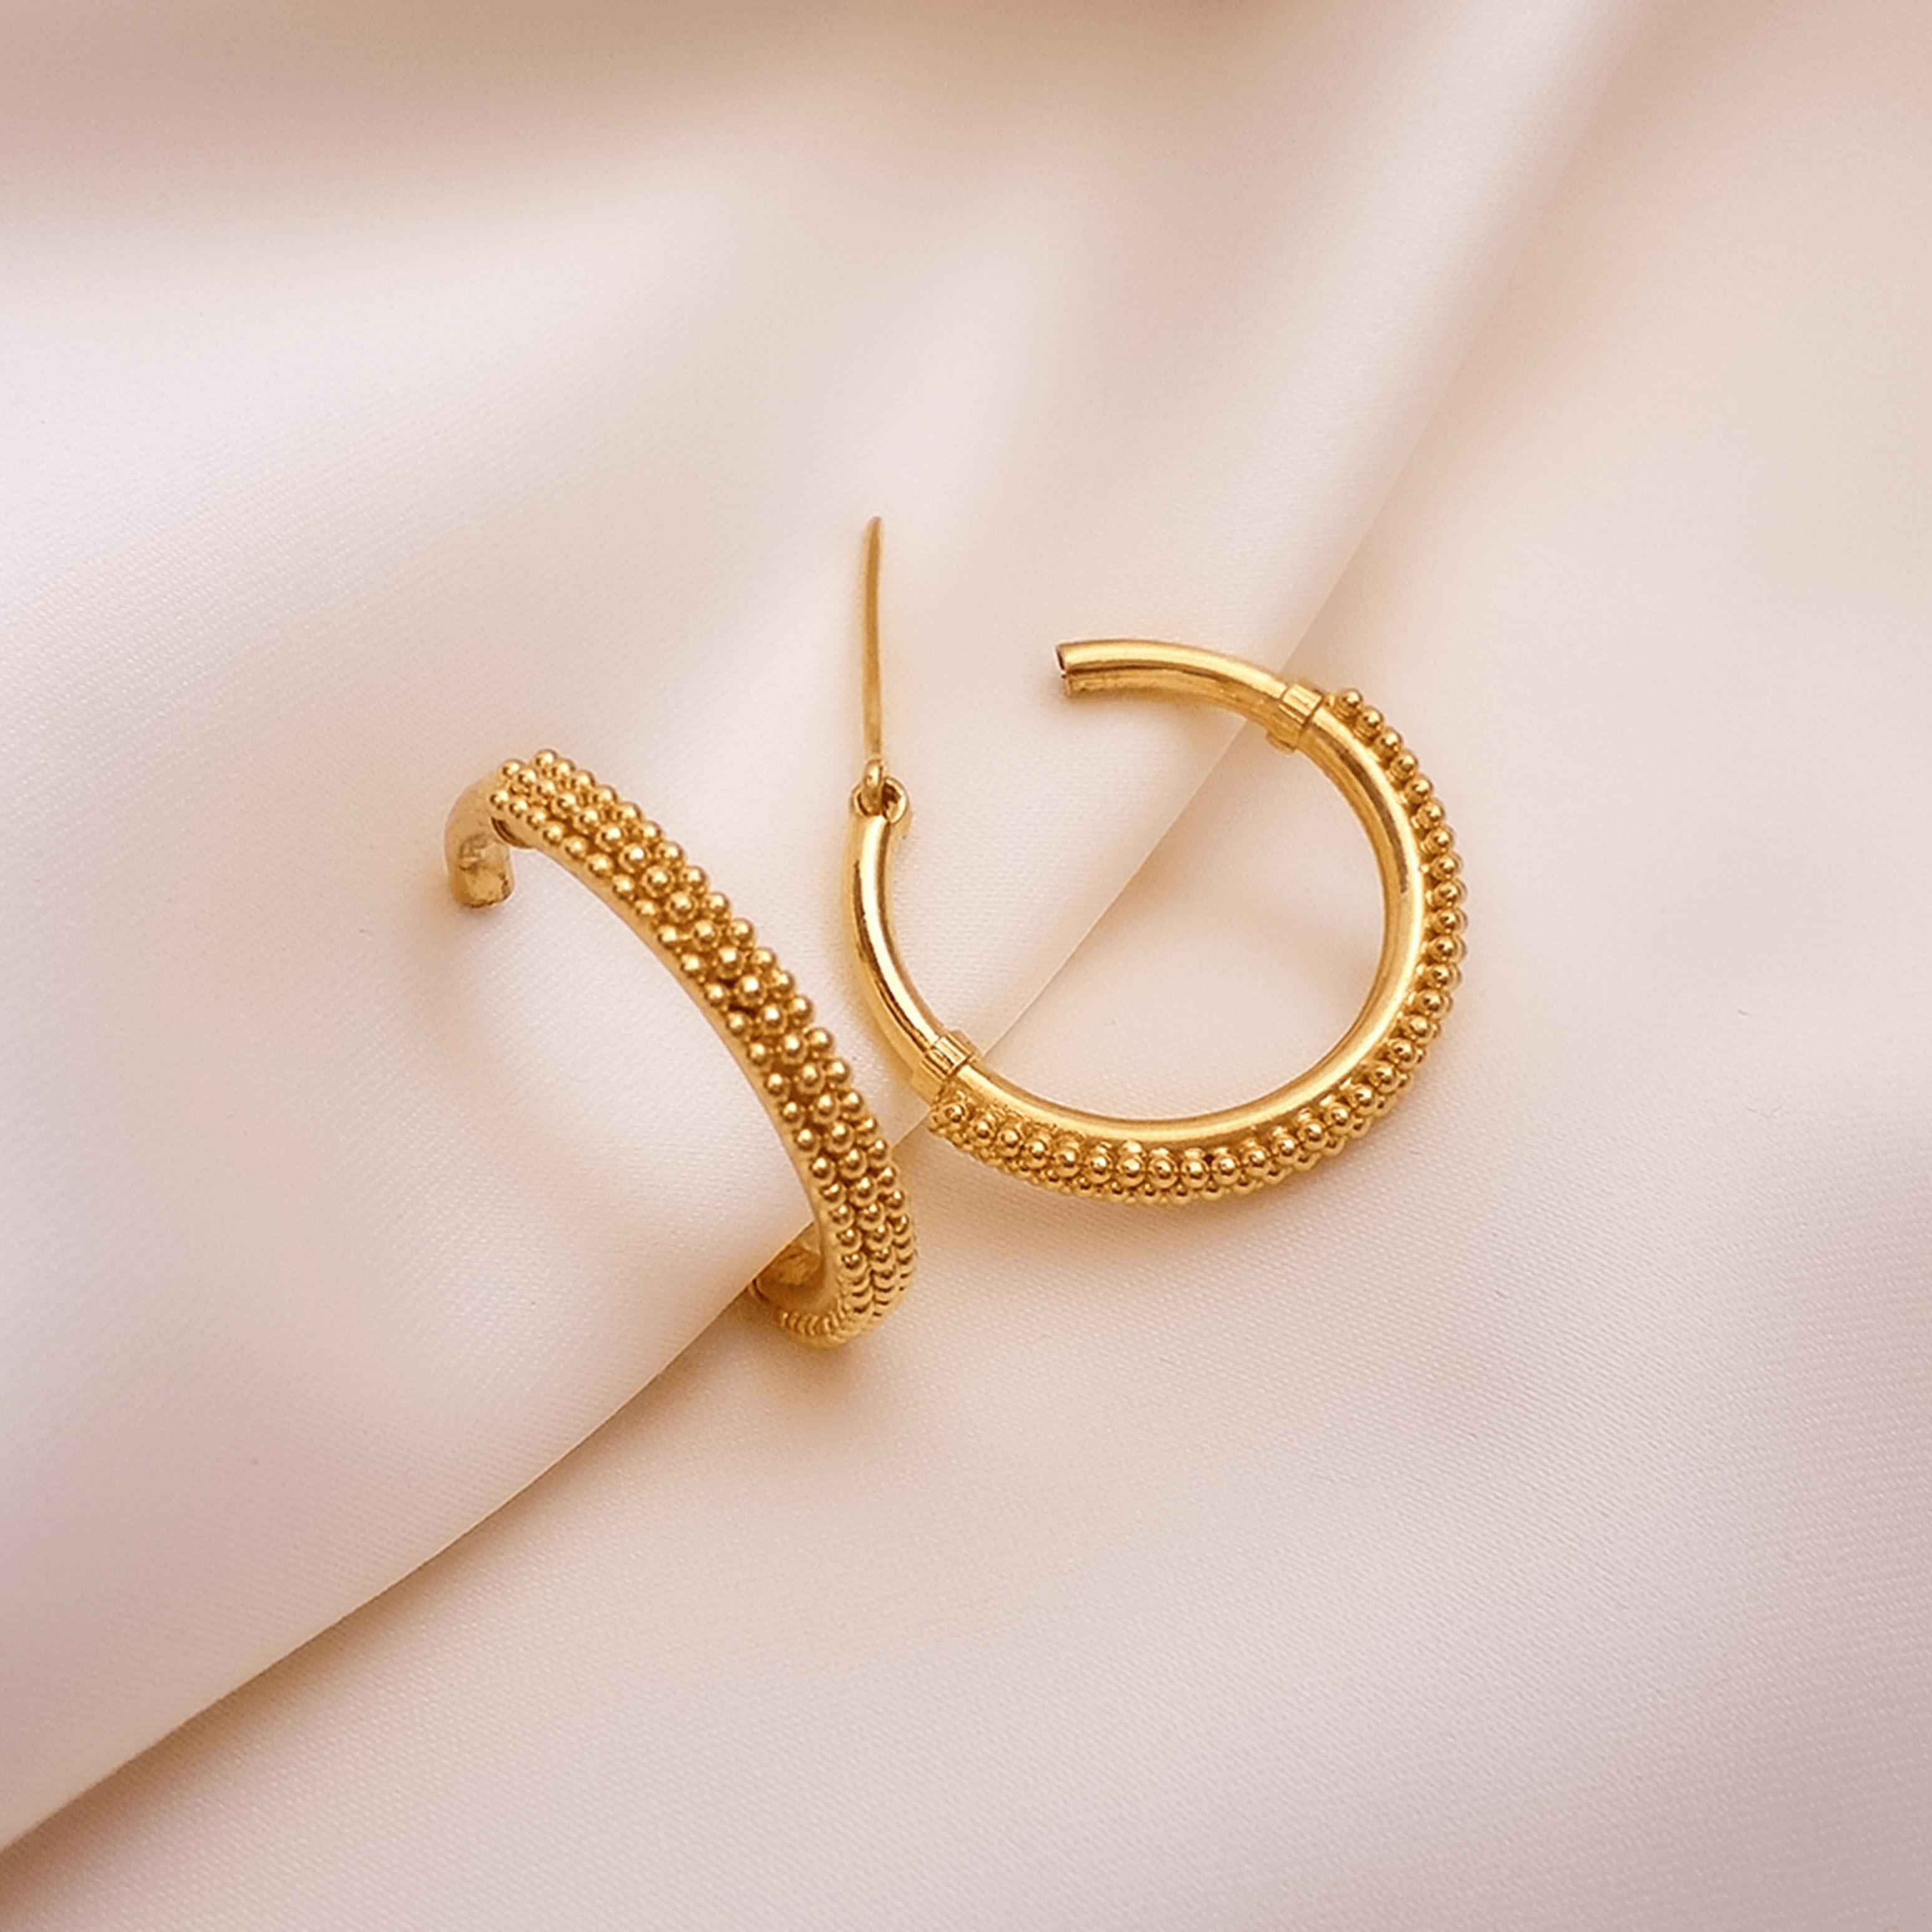 Latest 22kt Gold Hoop Earrings With Weight & Price